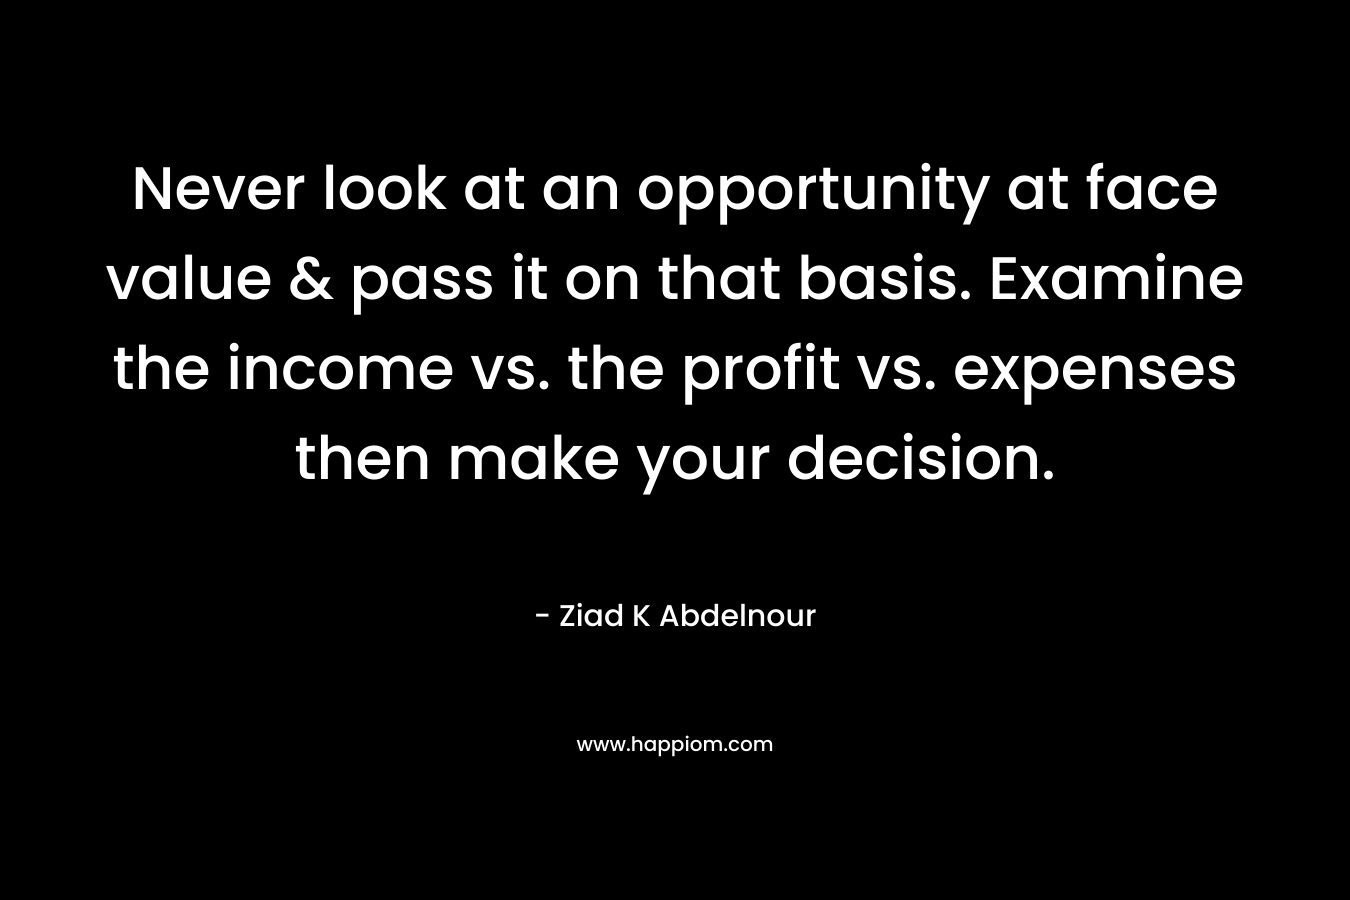 Never look at an opportunity at face value & pass it on that basis. Examine the income vs. the profit vs. expenses then make your decision. – Ziad K Abdelnour